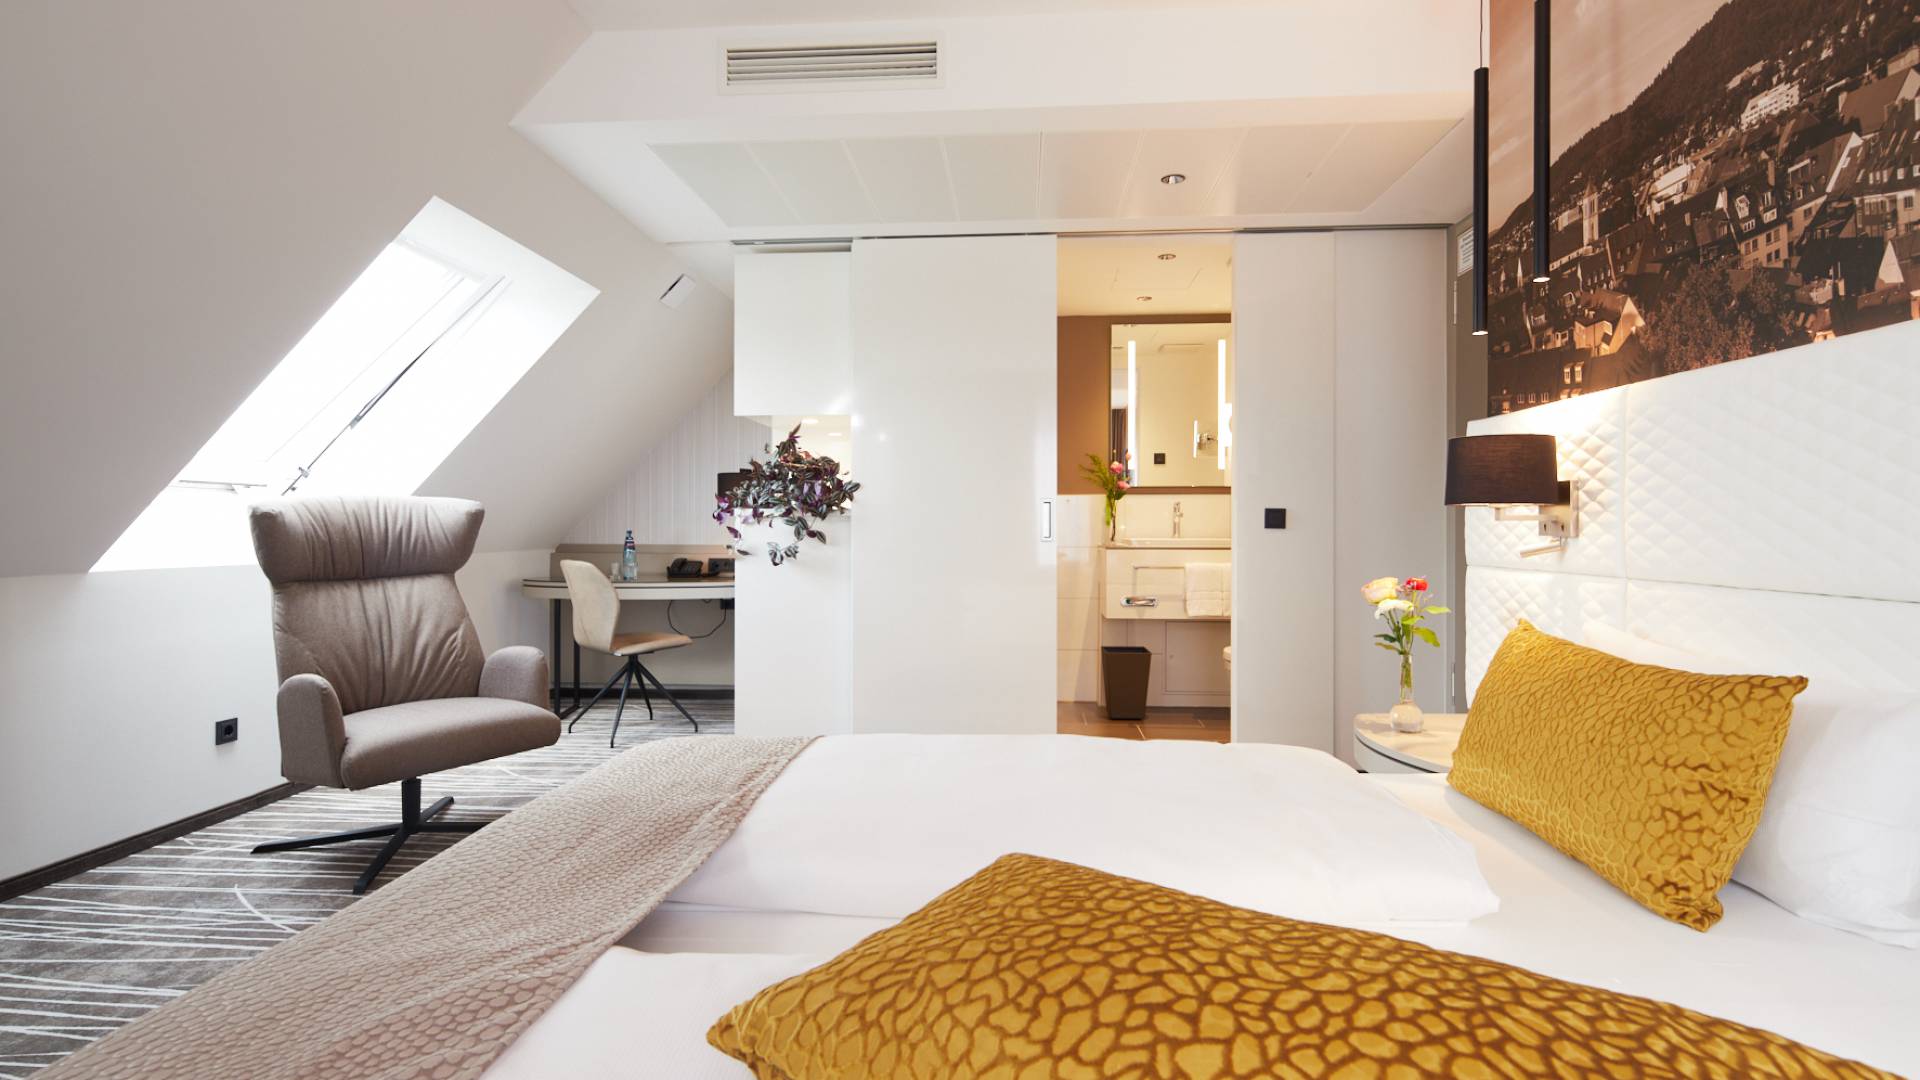 Hotel rooms - Boutiquehotel in Freiburg